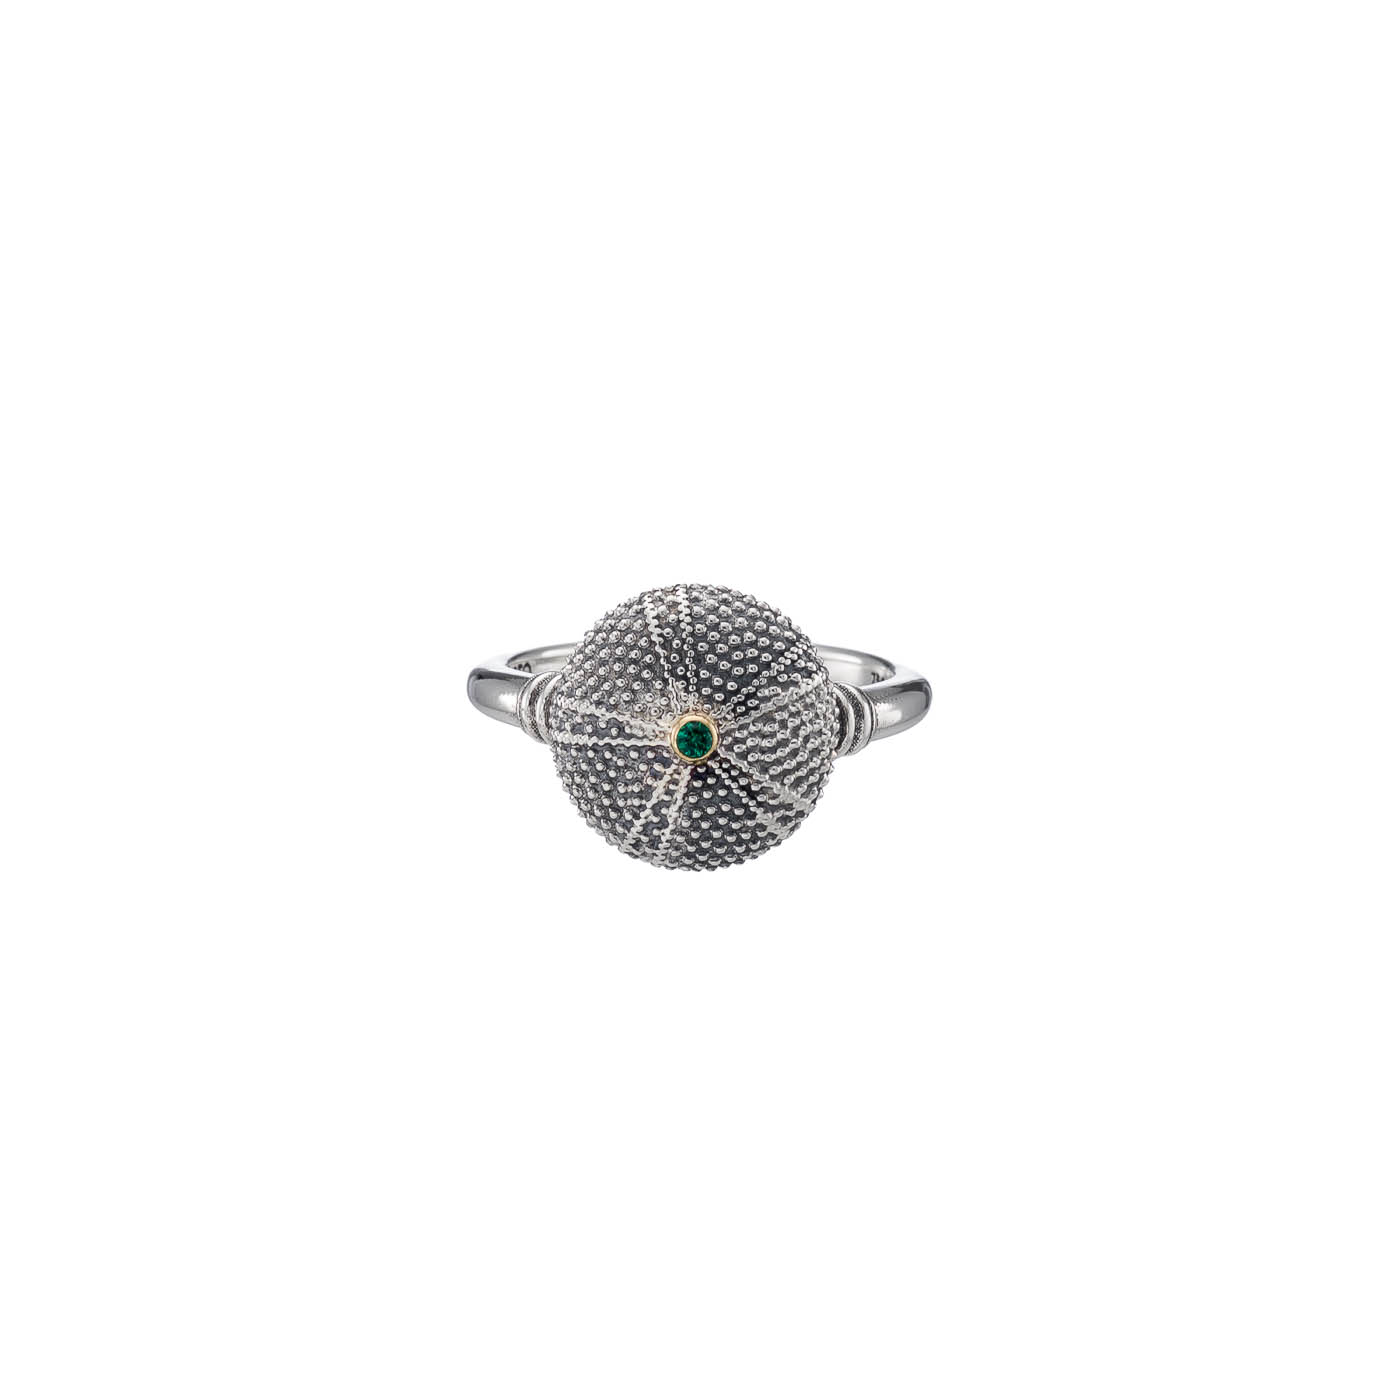 Sea Urchin Ring in Sterling Silver with 18K Gold detail and Tsavorite